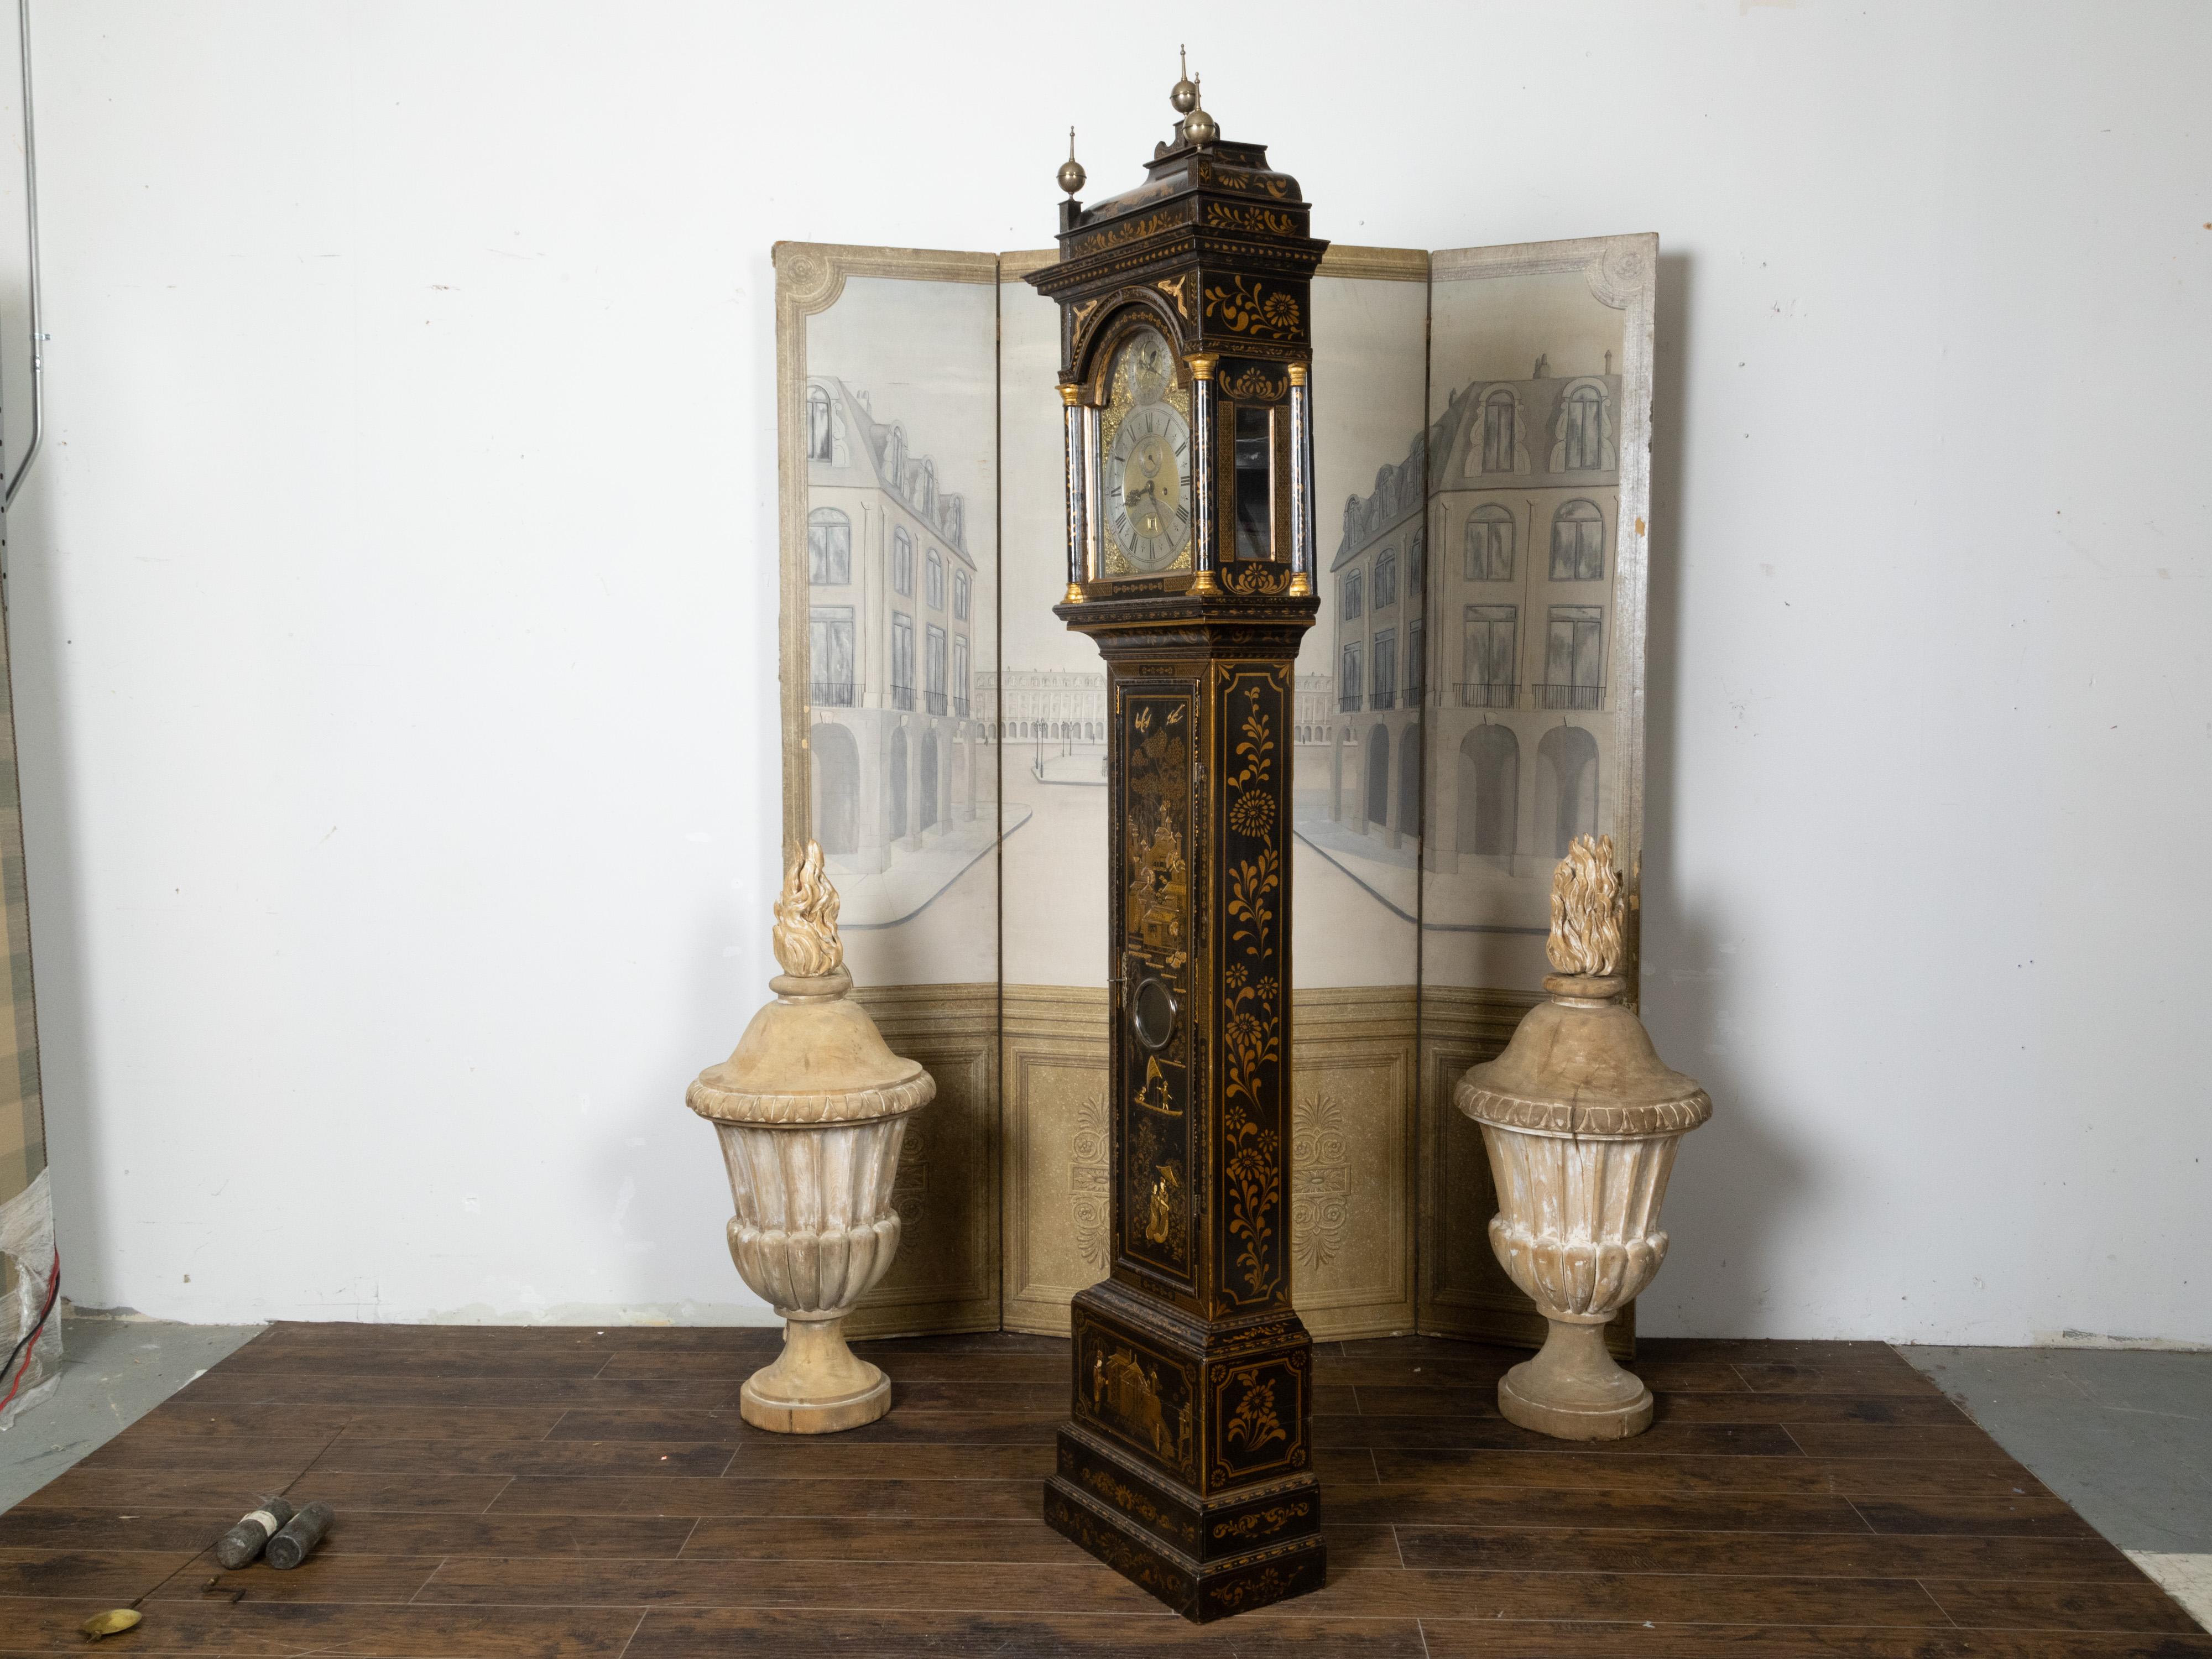 An English George III period Chinoiserie parcel gilt and japanned tall case clock from the 18th century, with black paint and arched brass dial. Created in England during the reign of king George III, this tall case clock features a slender